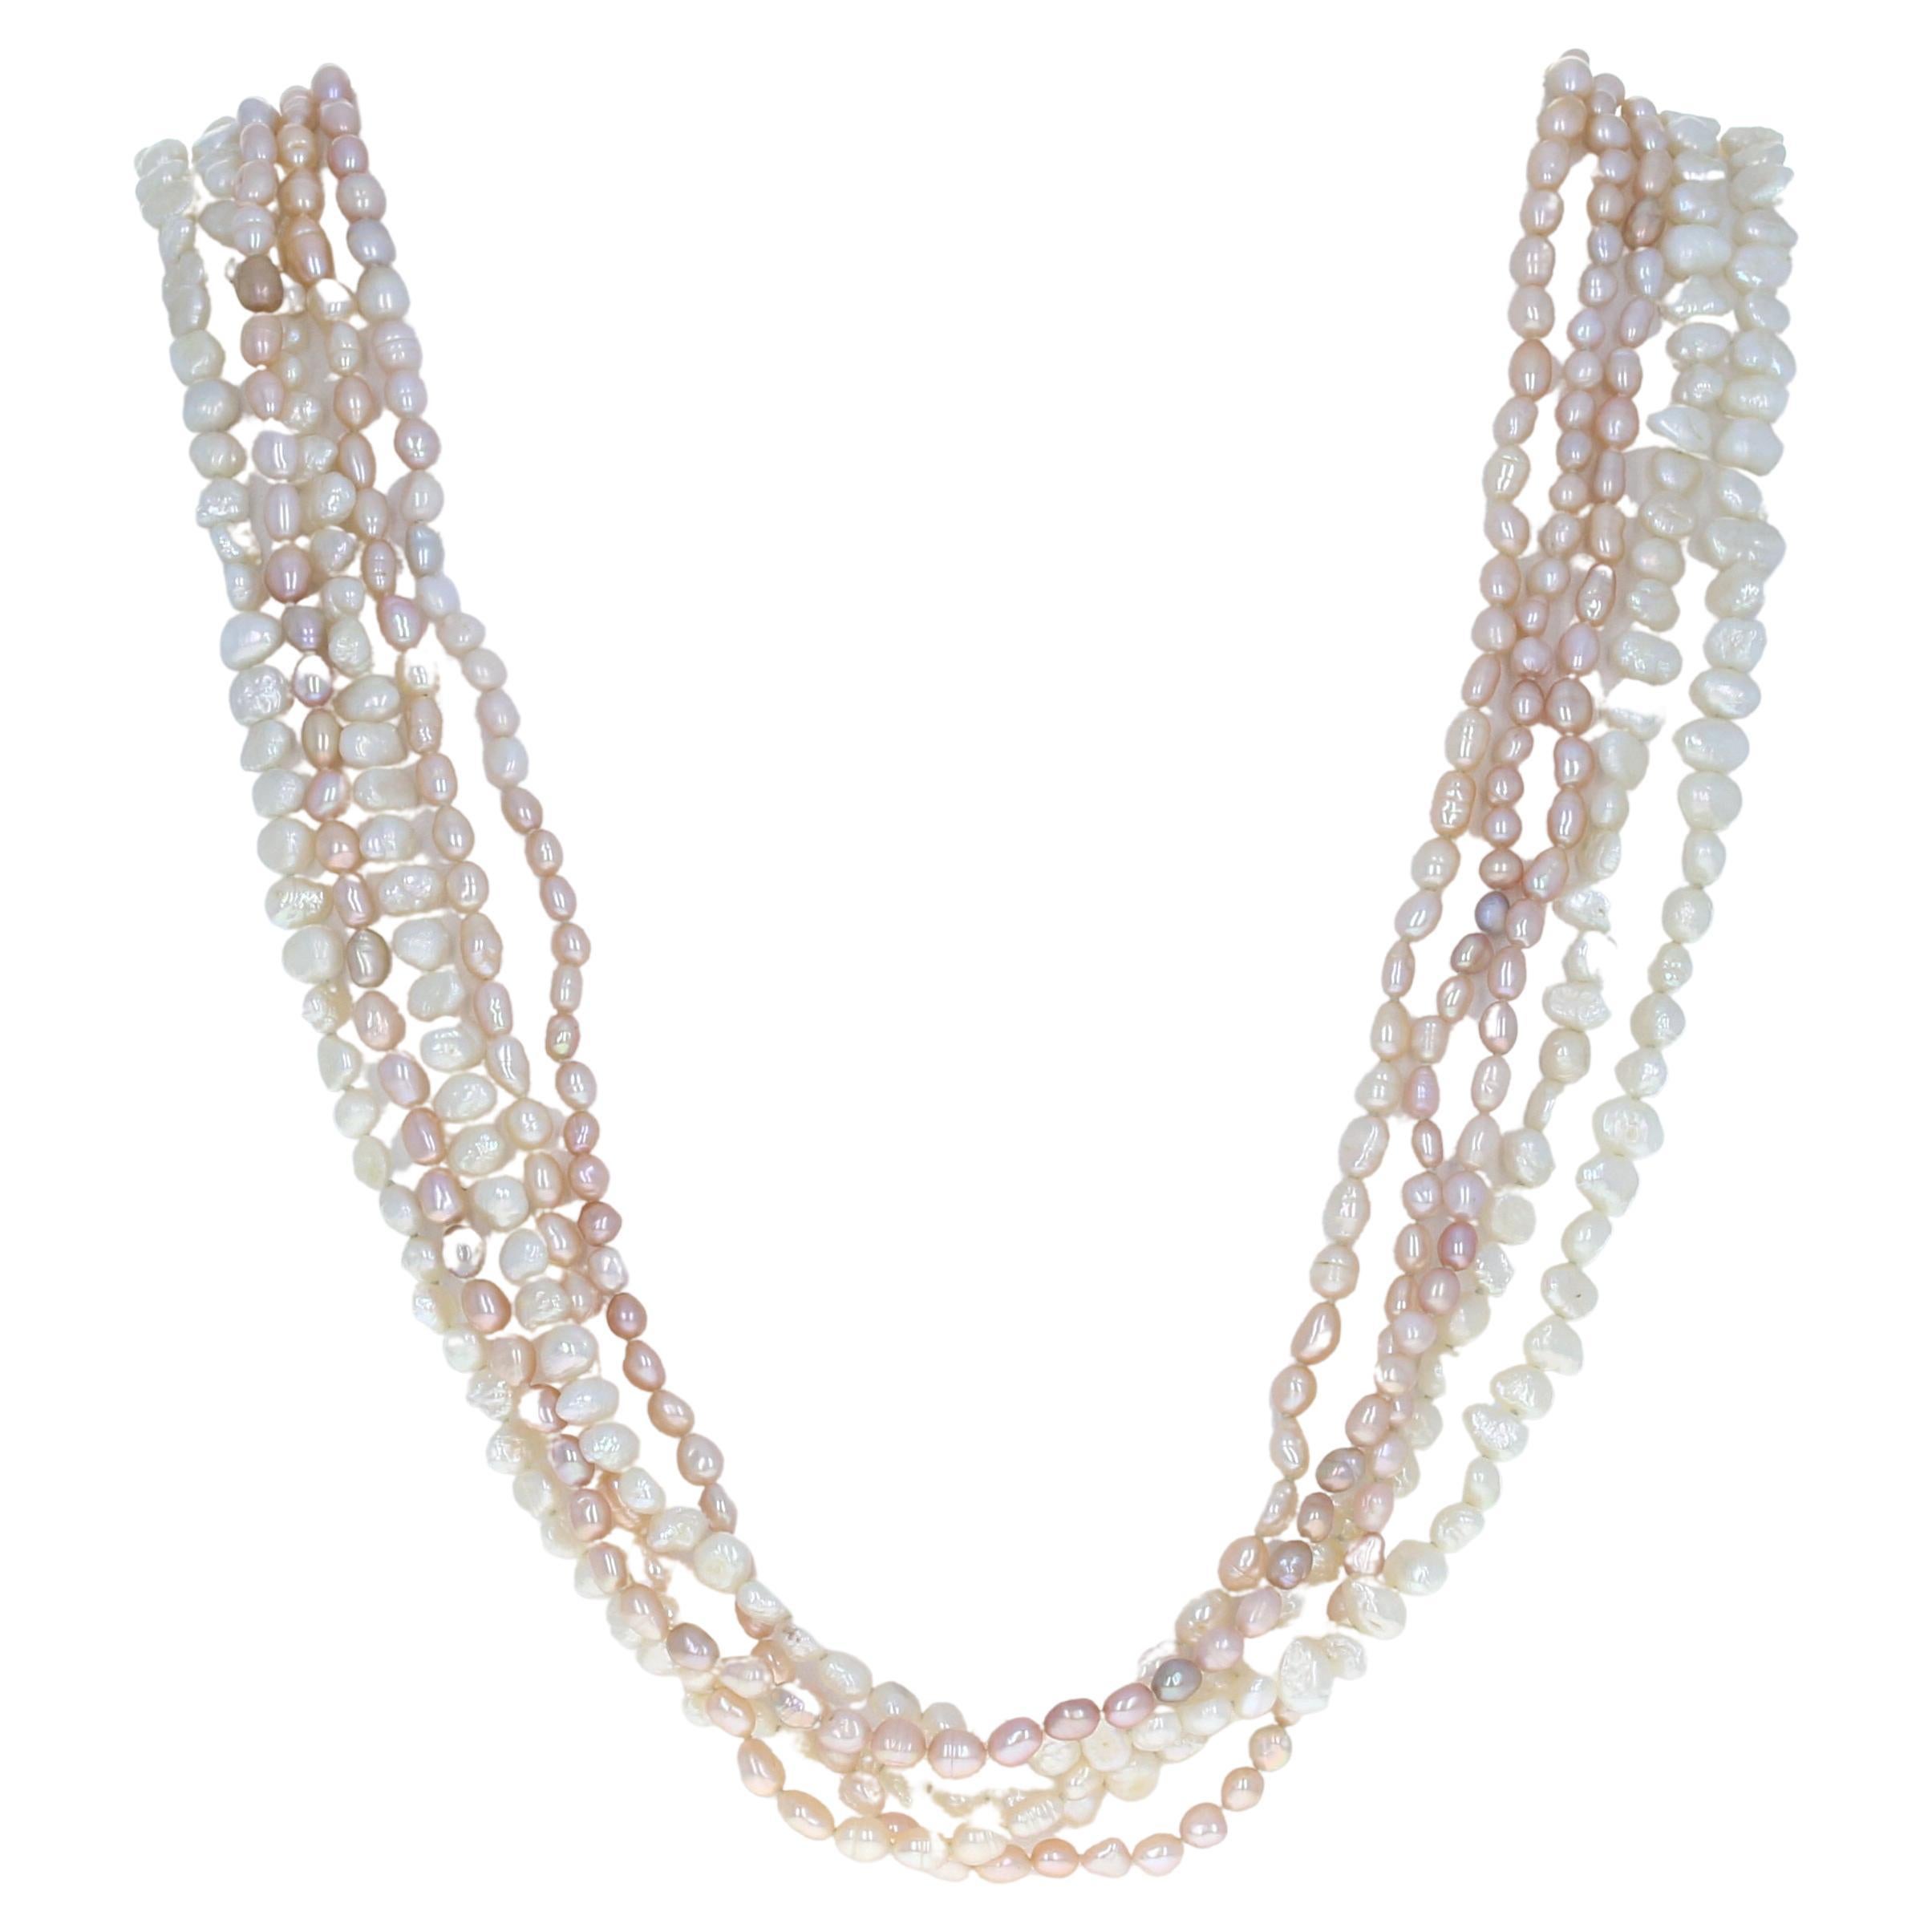 Freshwater Keshi Pearl Necklace, 14k Yellow Gold Knotted Five-Strand